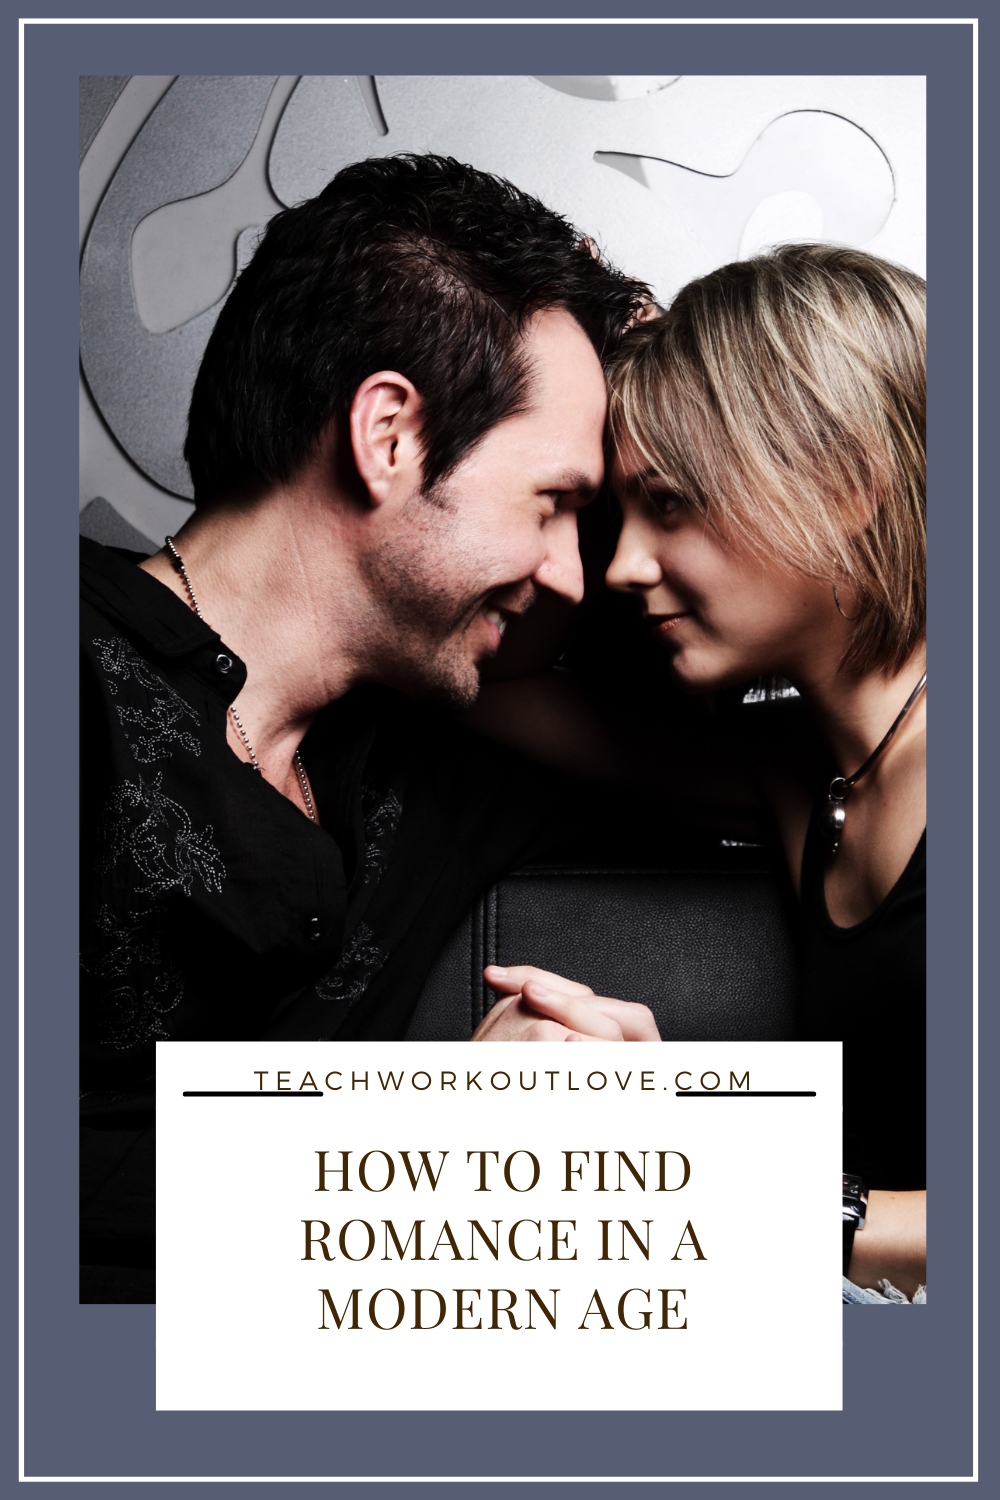 Dating and finding romance in the modern age is considered challenging to say the least. With online dating apps taking out the effort that comes with forging meaningful connections, it often leads to relationships and connections that are very fickle.     With that being said, there are still ways to find the Mr. or Mrs. Right in life. Here’s a guide to finding romance in the modern age.